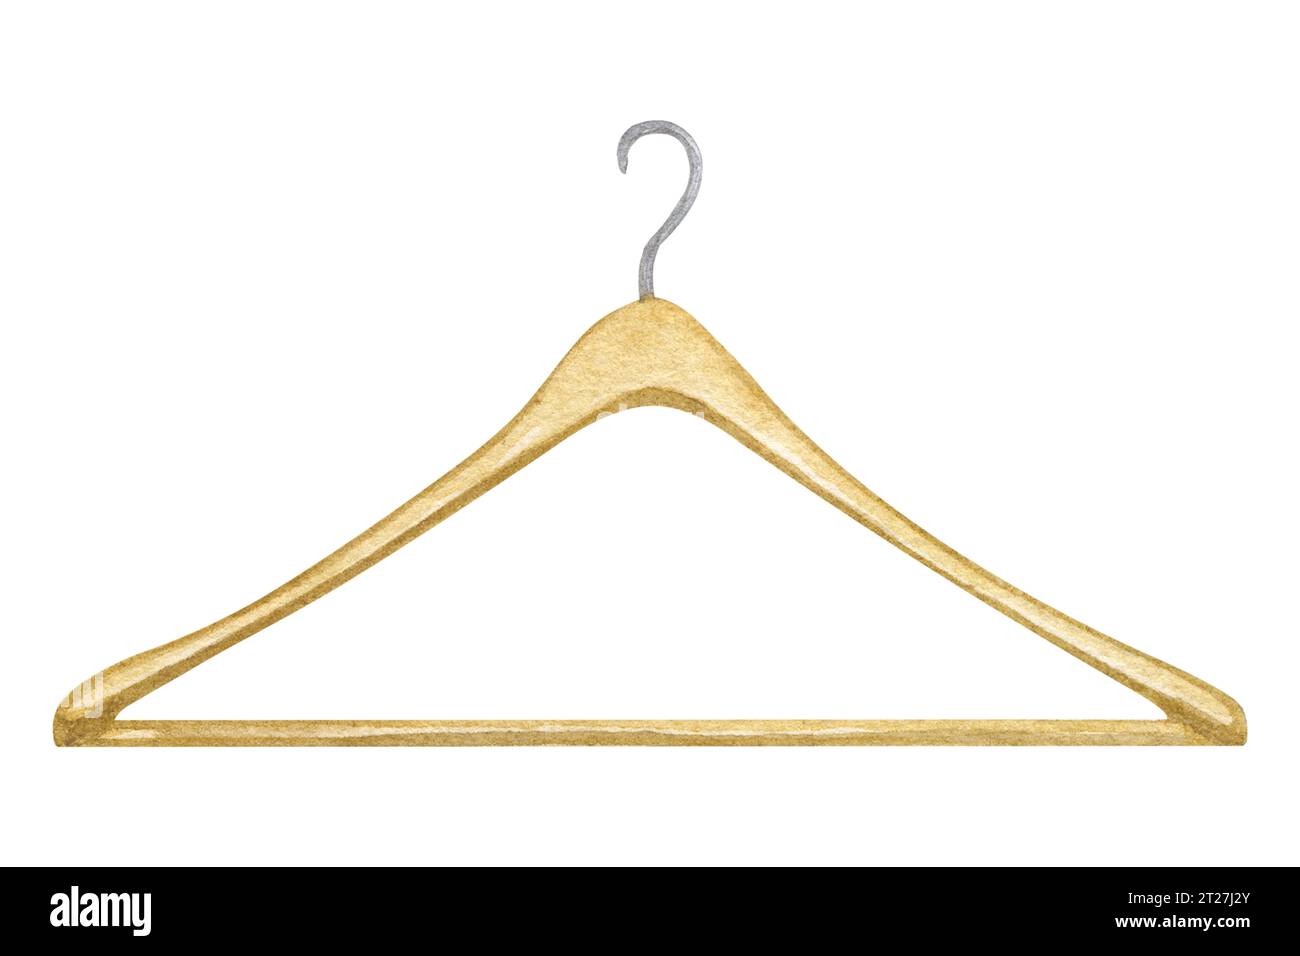 Wooden clothes hanger, empty classic shape. Hand drawn watercolor illustration isolated on white background. Collection of antique toys Stock Photo